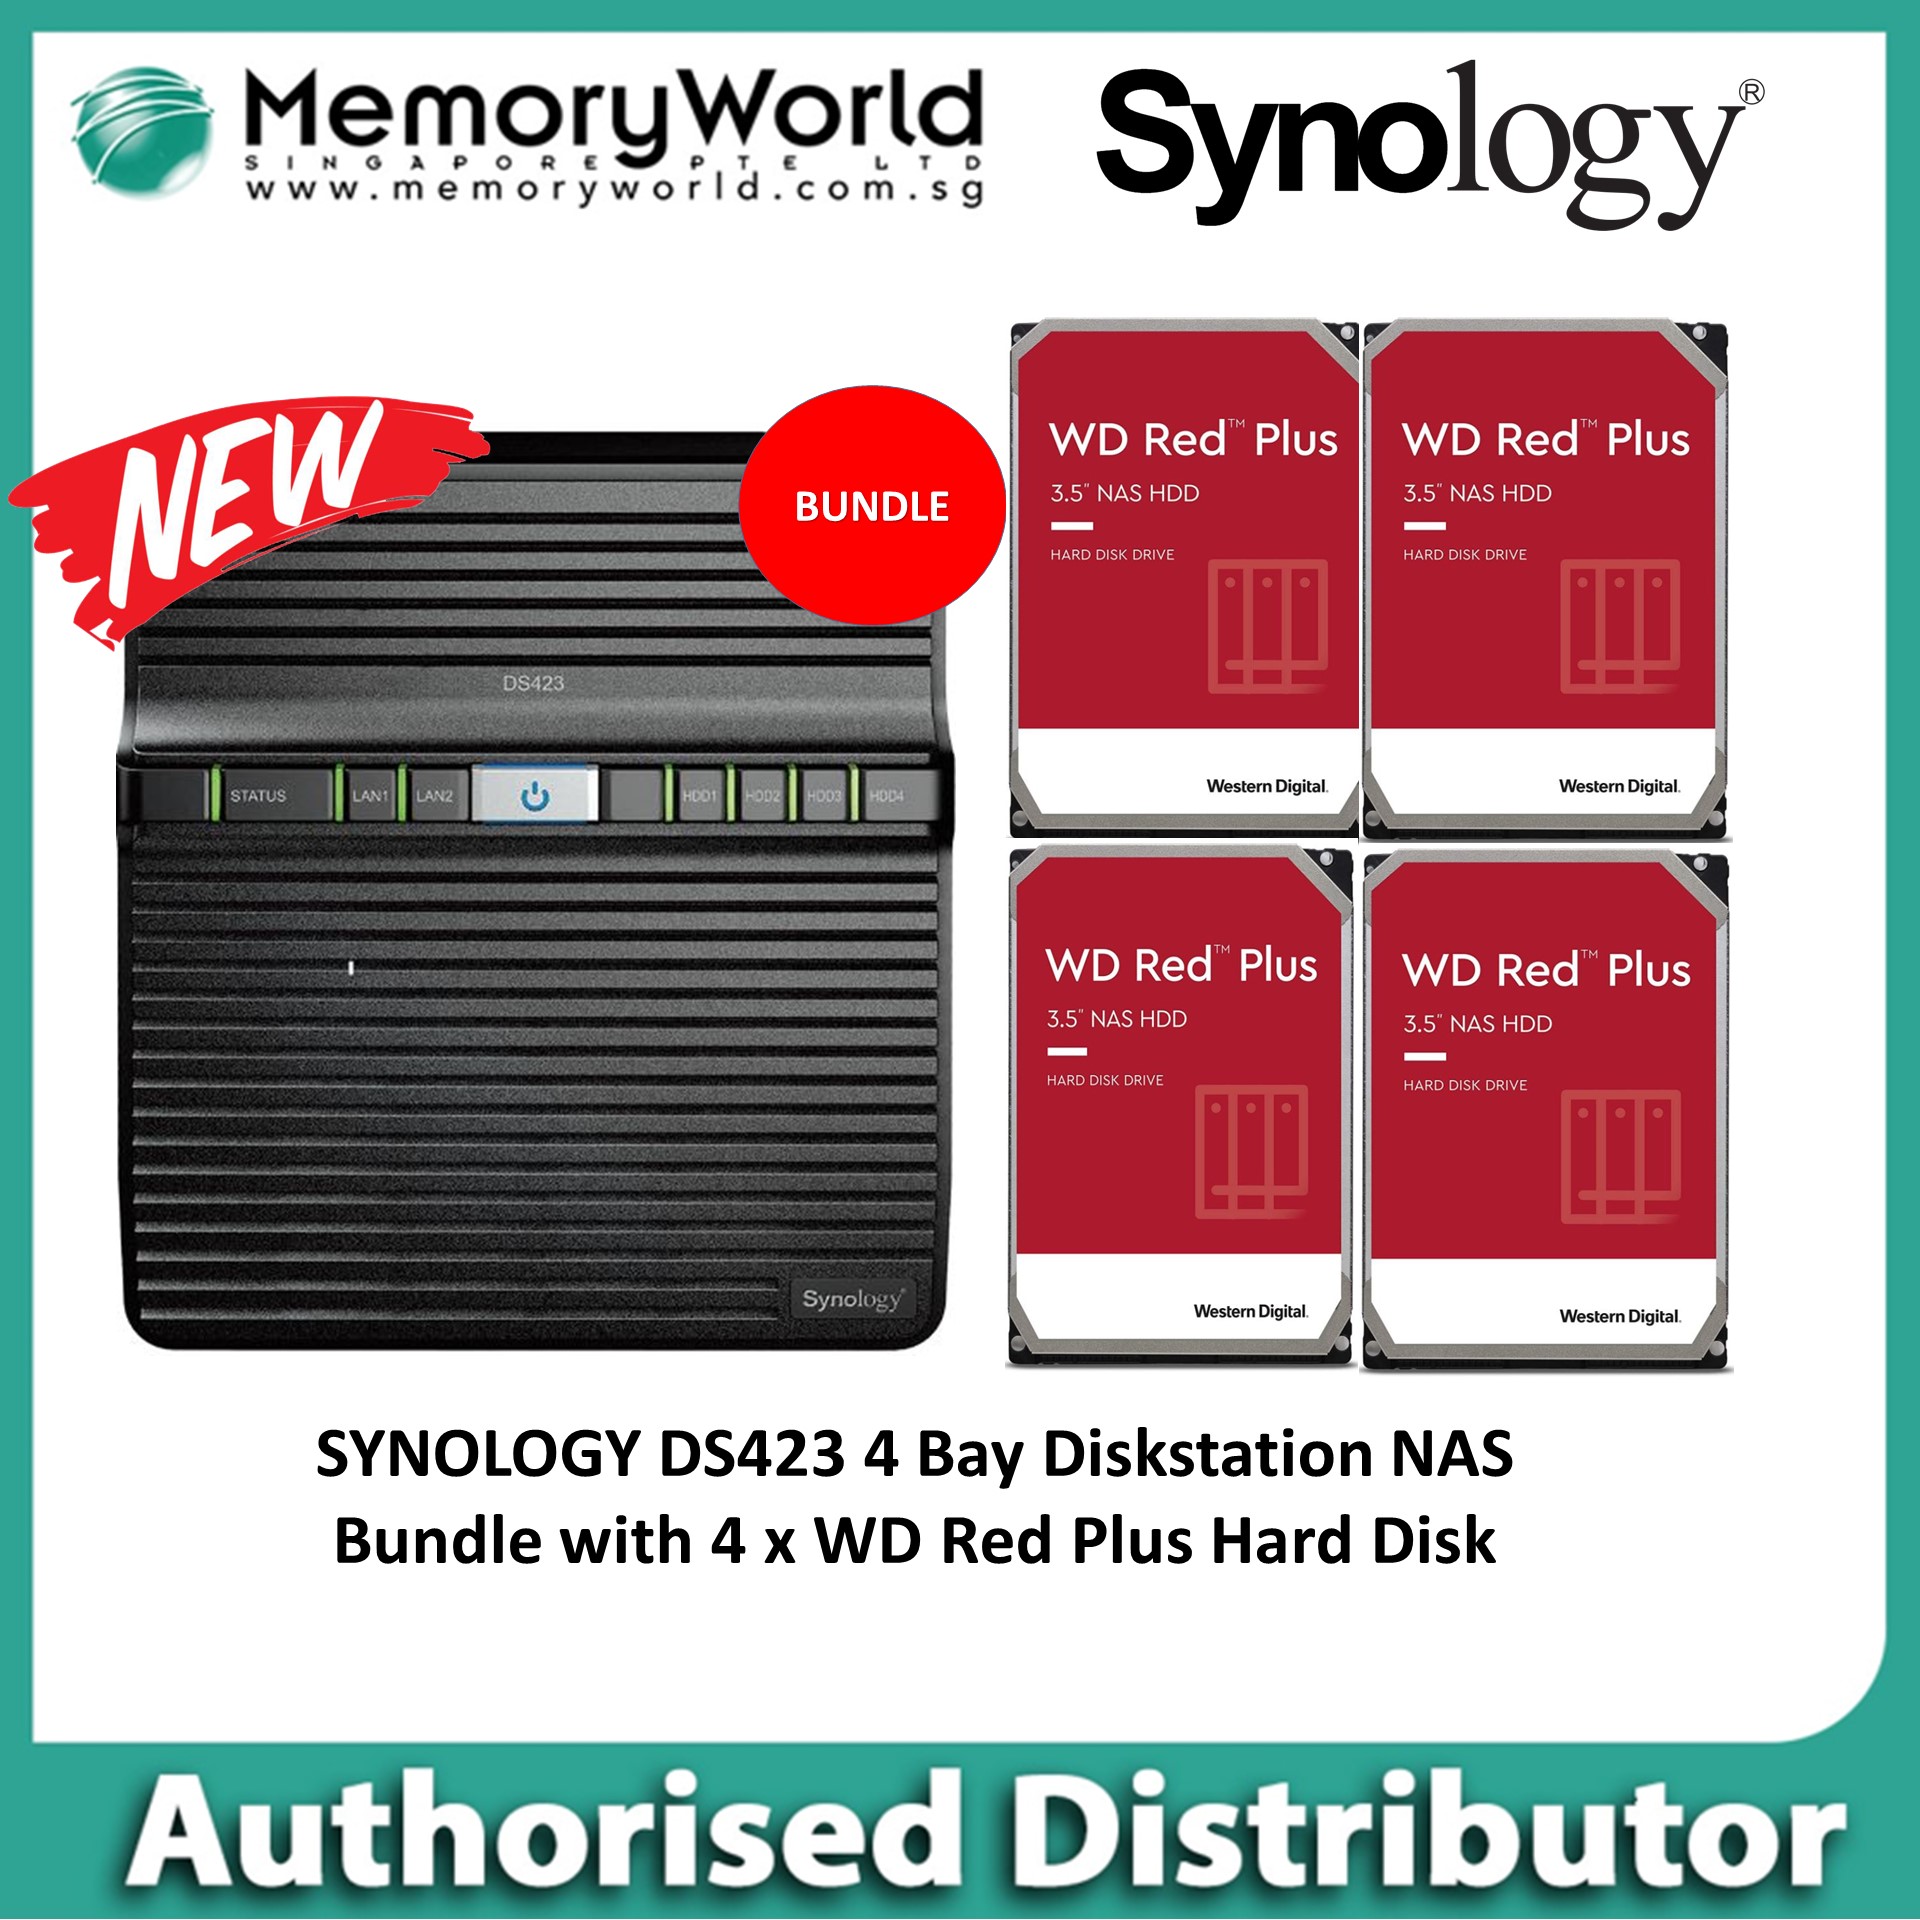 SYNOLOGY Authorised Distributor] SYNOLOGY DS423 4 Bay DiskStation